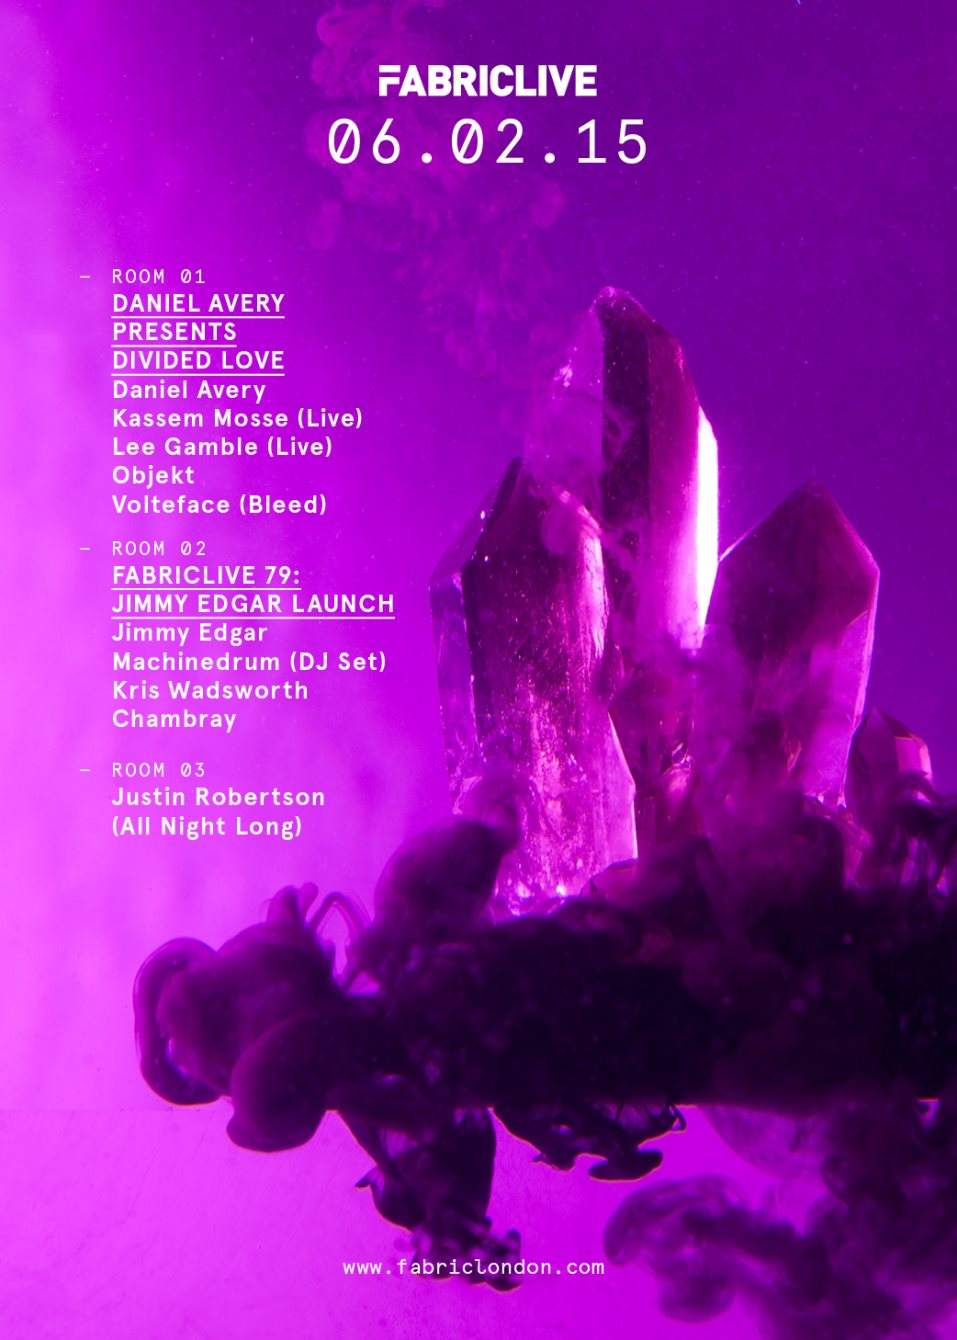 Fabriclive: Daniel Avery presents Divided Love & Jimmy Edgar Fabriclive 79 Launch - Página frontal